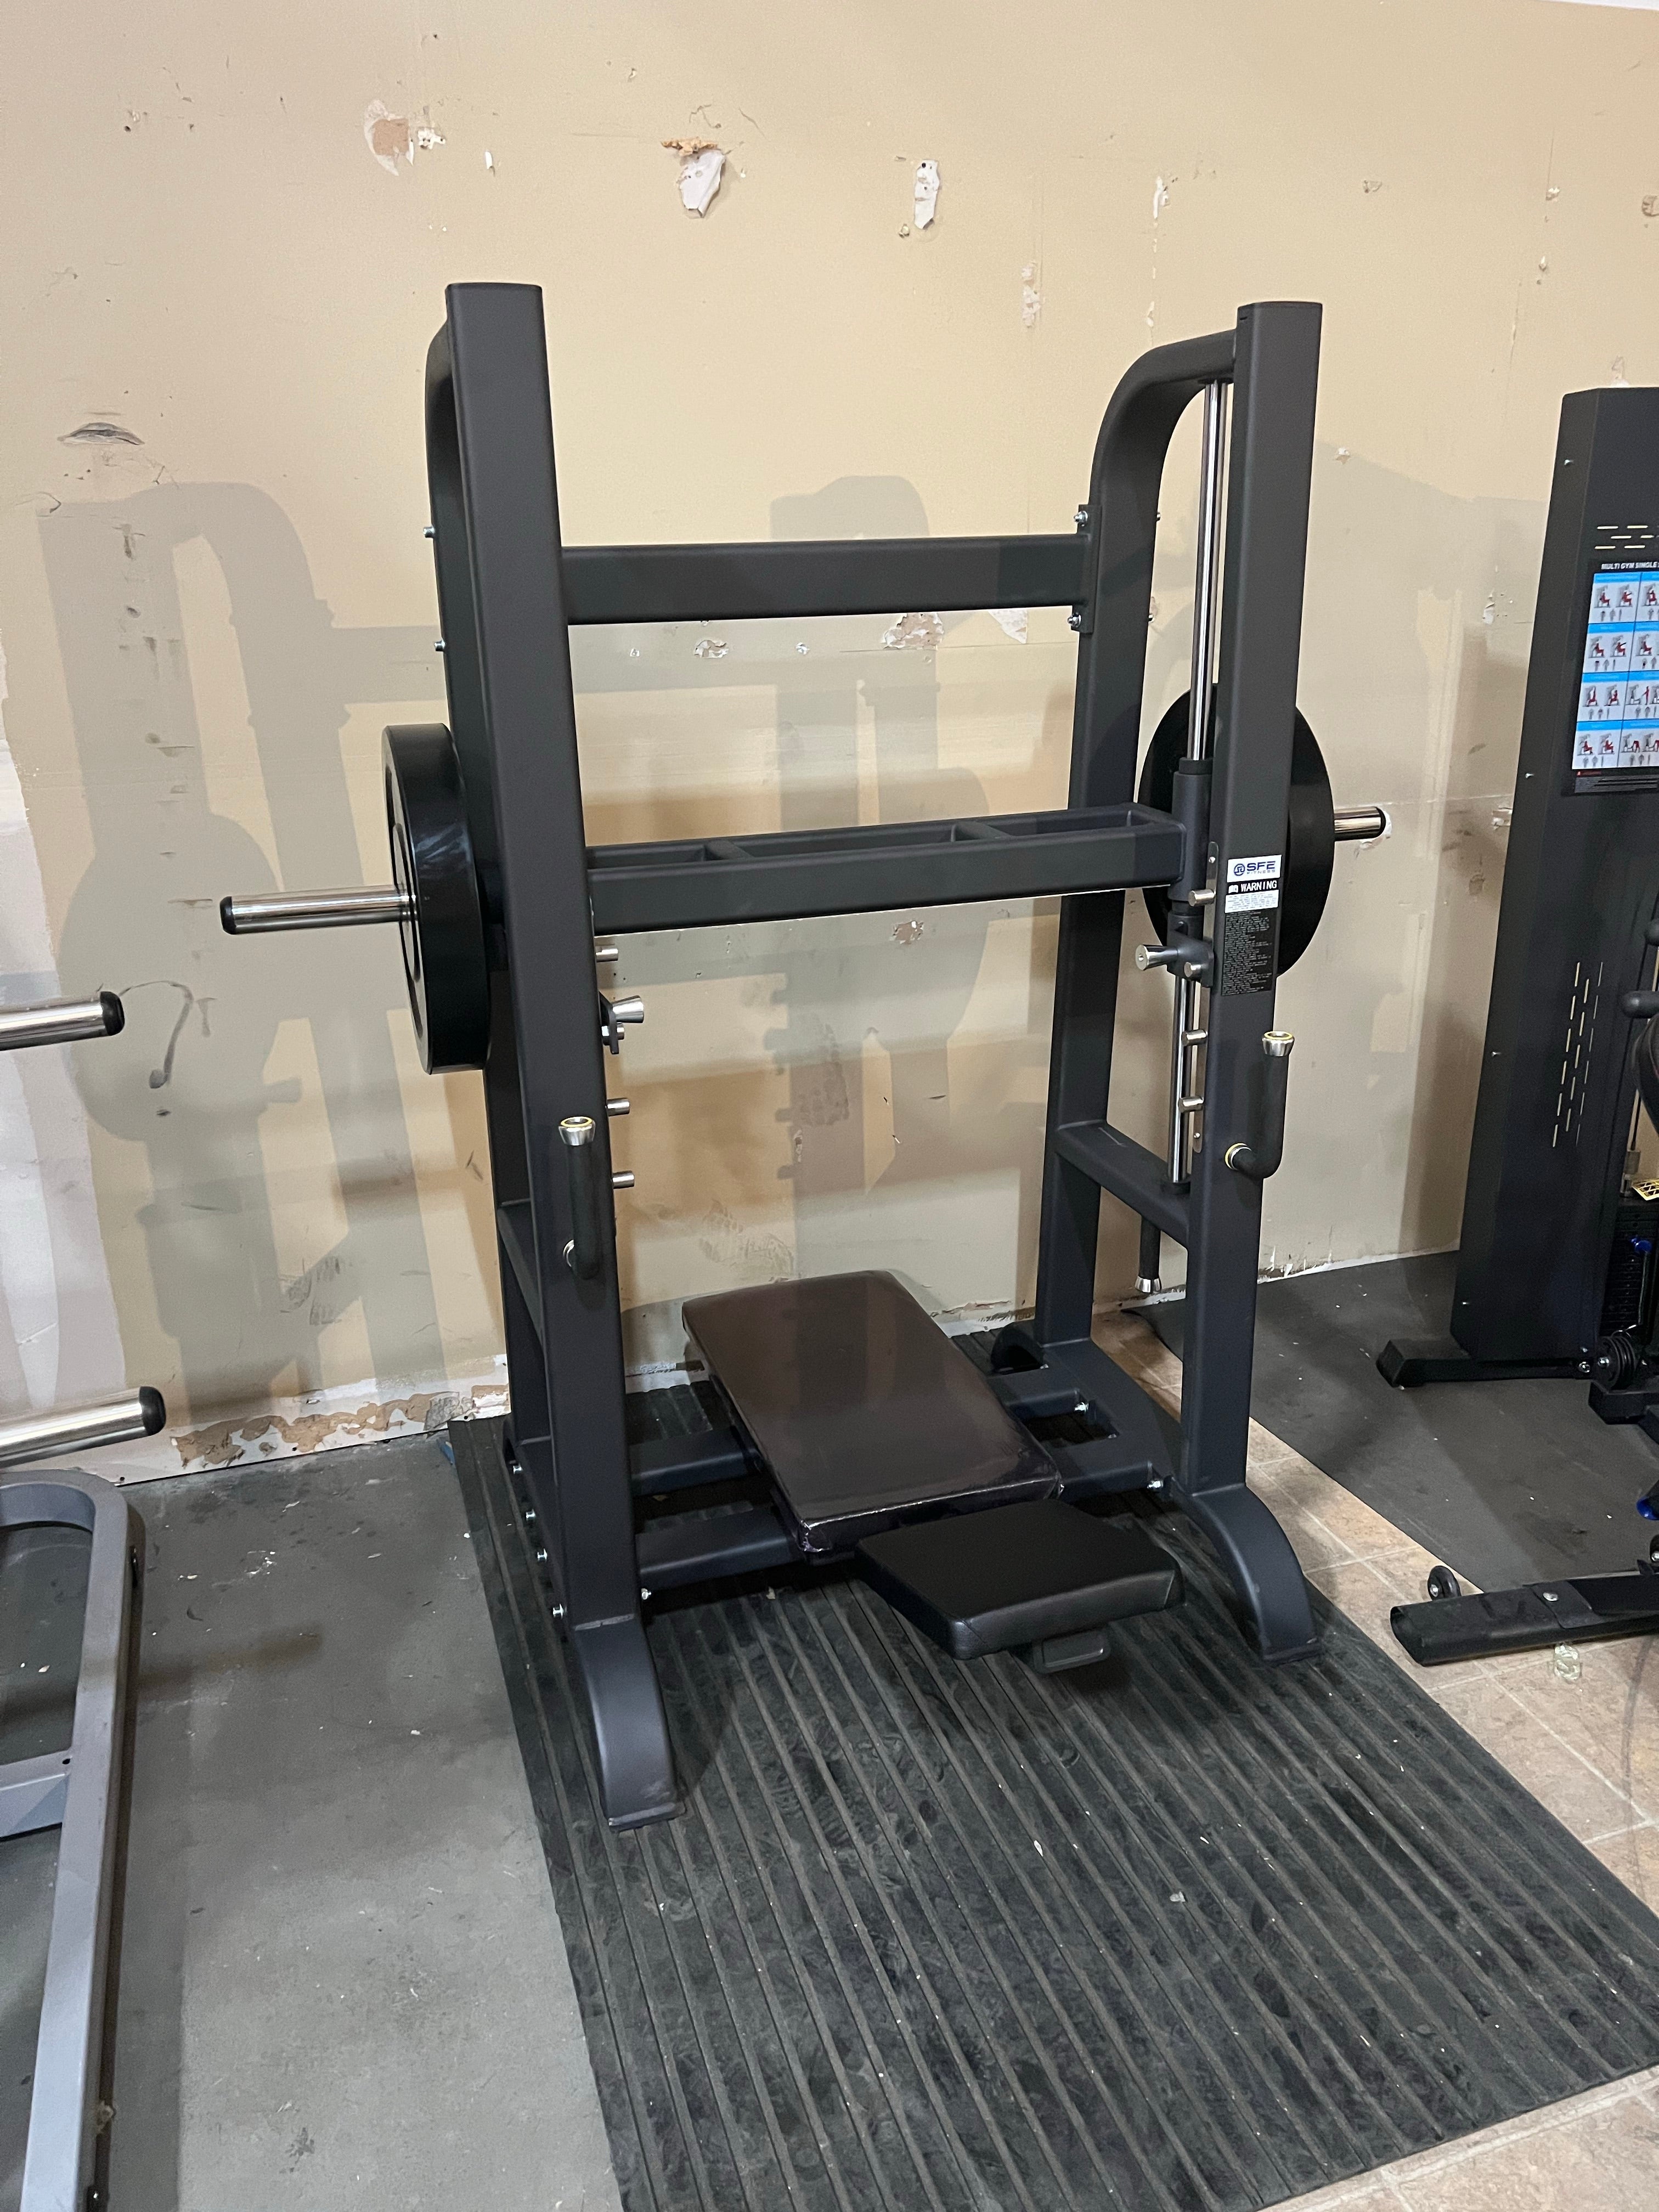 SFE Commercial Vertical Plate Loaded Leg Press ( New)